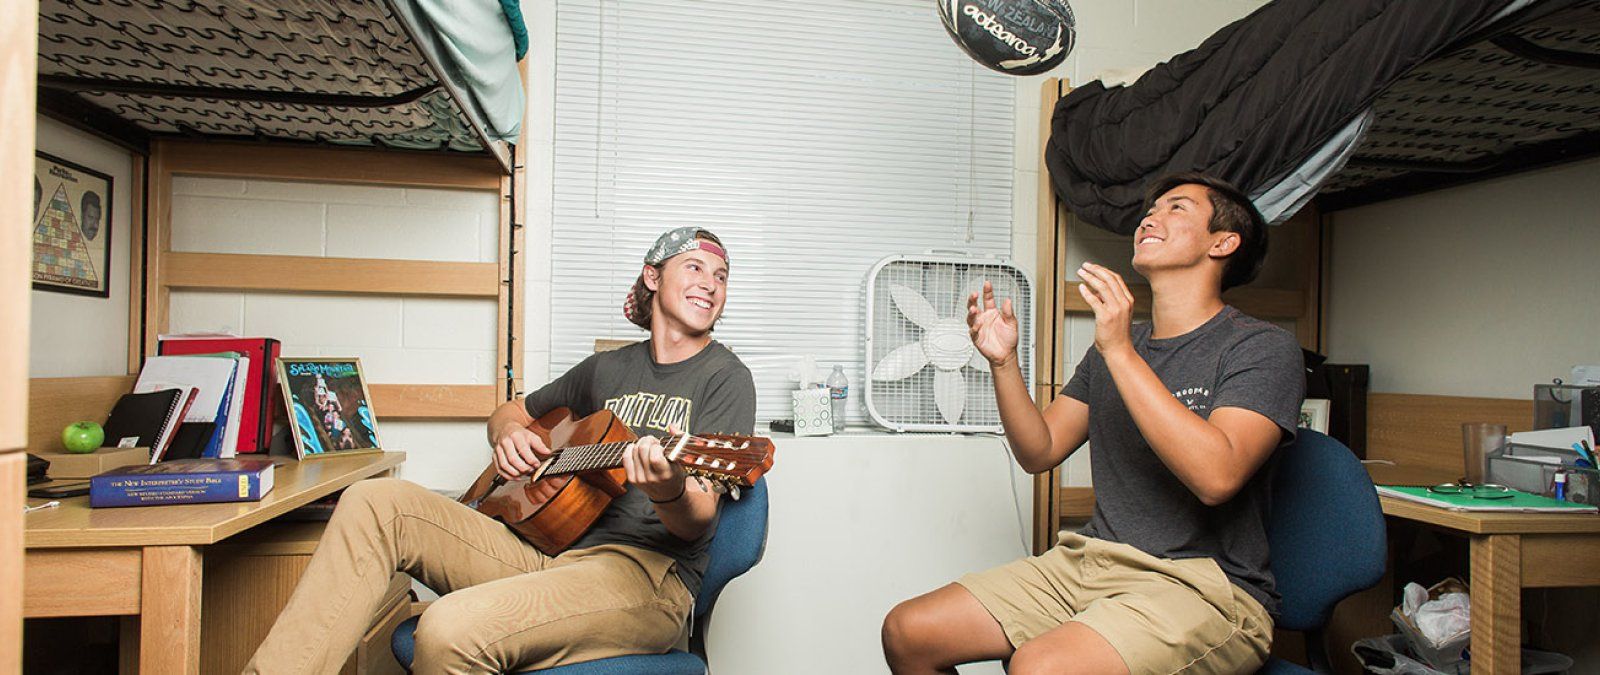 Freshman students show off their room space in Nease Hall.